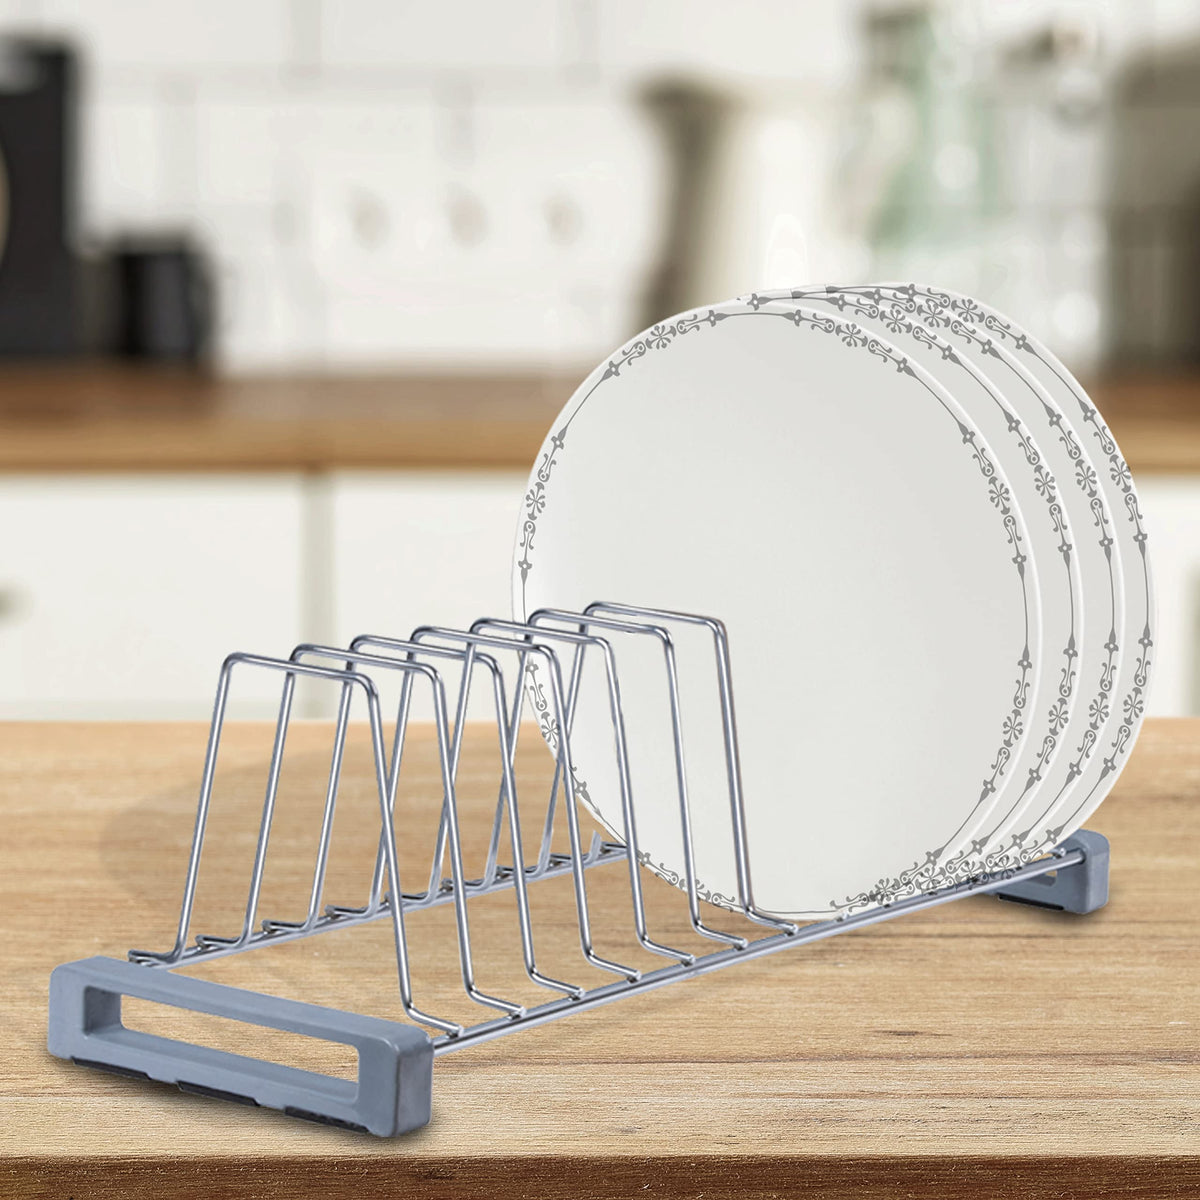 Plantex Stainless Steel Dish Rack/Plate Stand/Thali Stand for Modular Kitchen/Tandem Box Accessories - Pack of 1 (Chrome Finish)